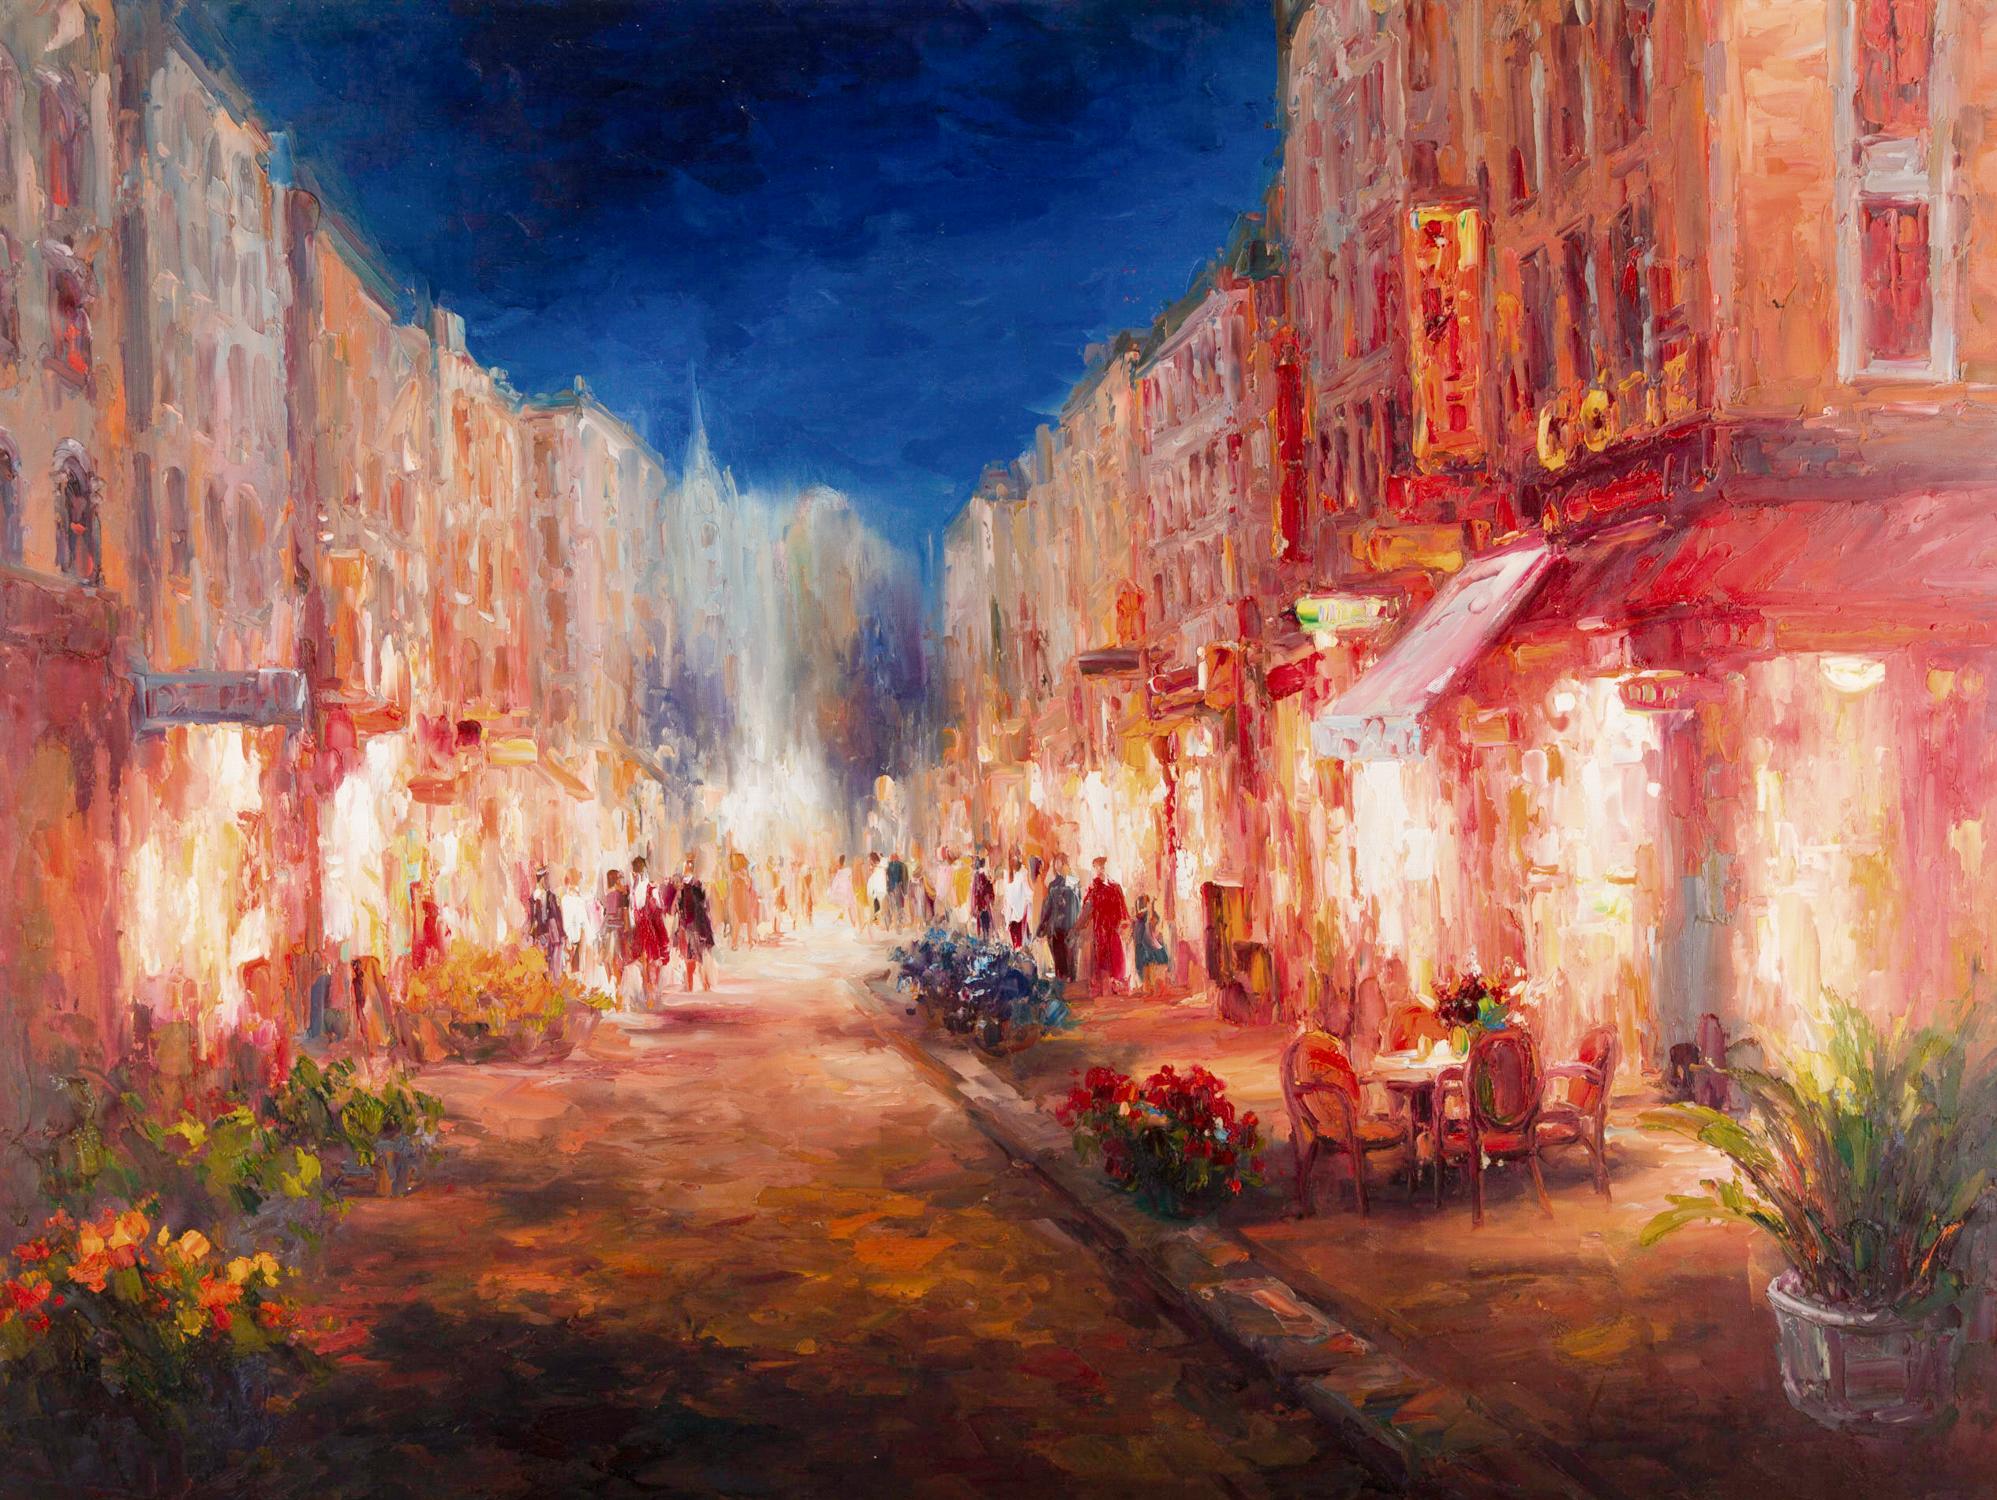  Title: Night 3
 Medium: Oil on canvas
 Size: 39 x 30 inches
 Frame: Framing options available!
 Condition: The painting is laid on the matt board and appears to be in excellent condition.
 
 Year: 2000 Circa
 Artist: Lin Hongdan 
 Signature: